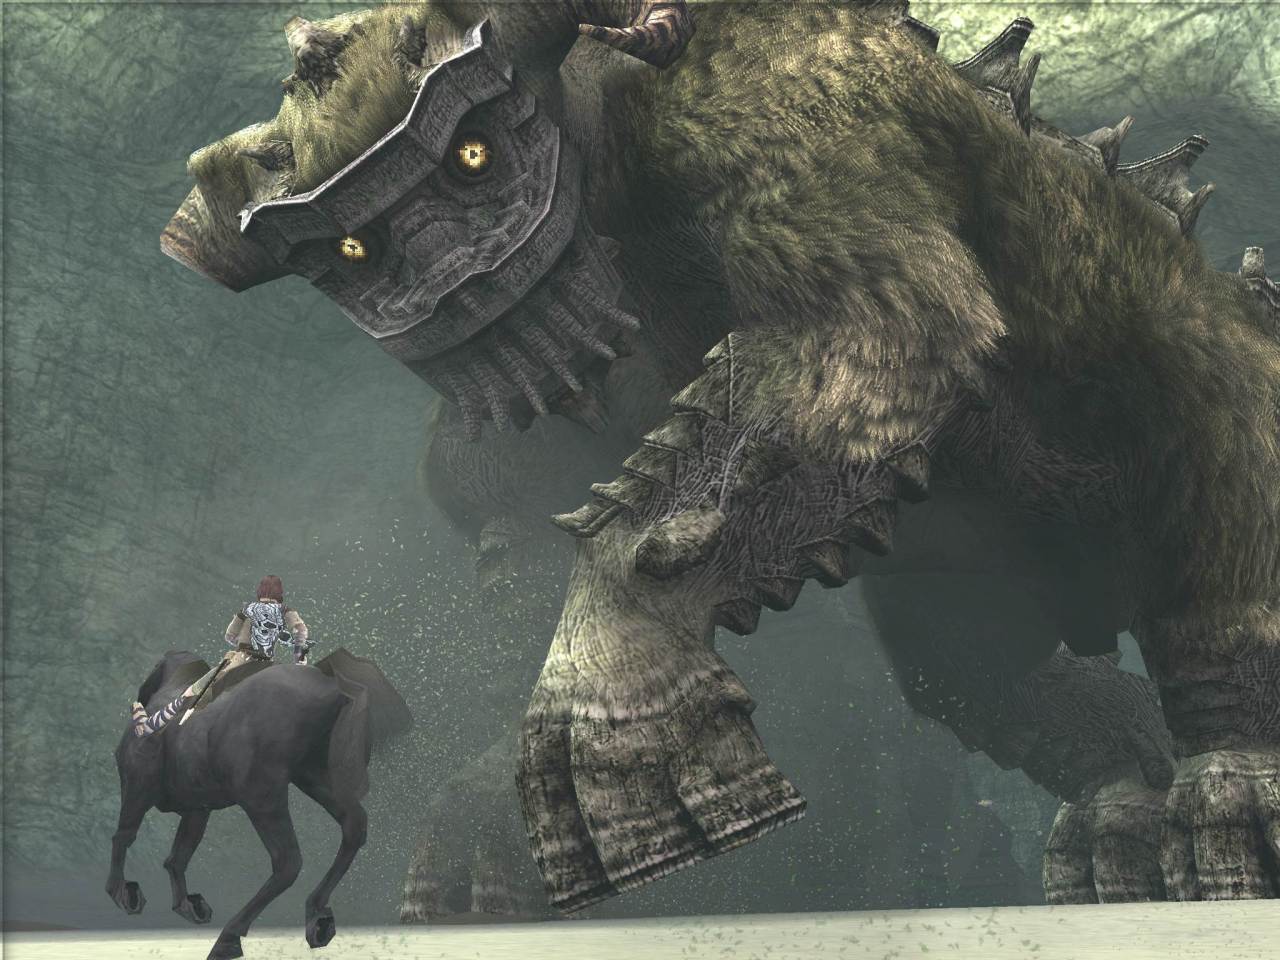 shadow-of-the-colossus